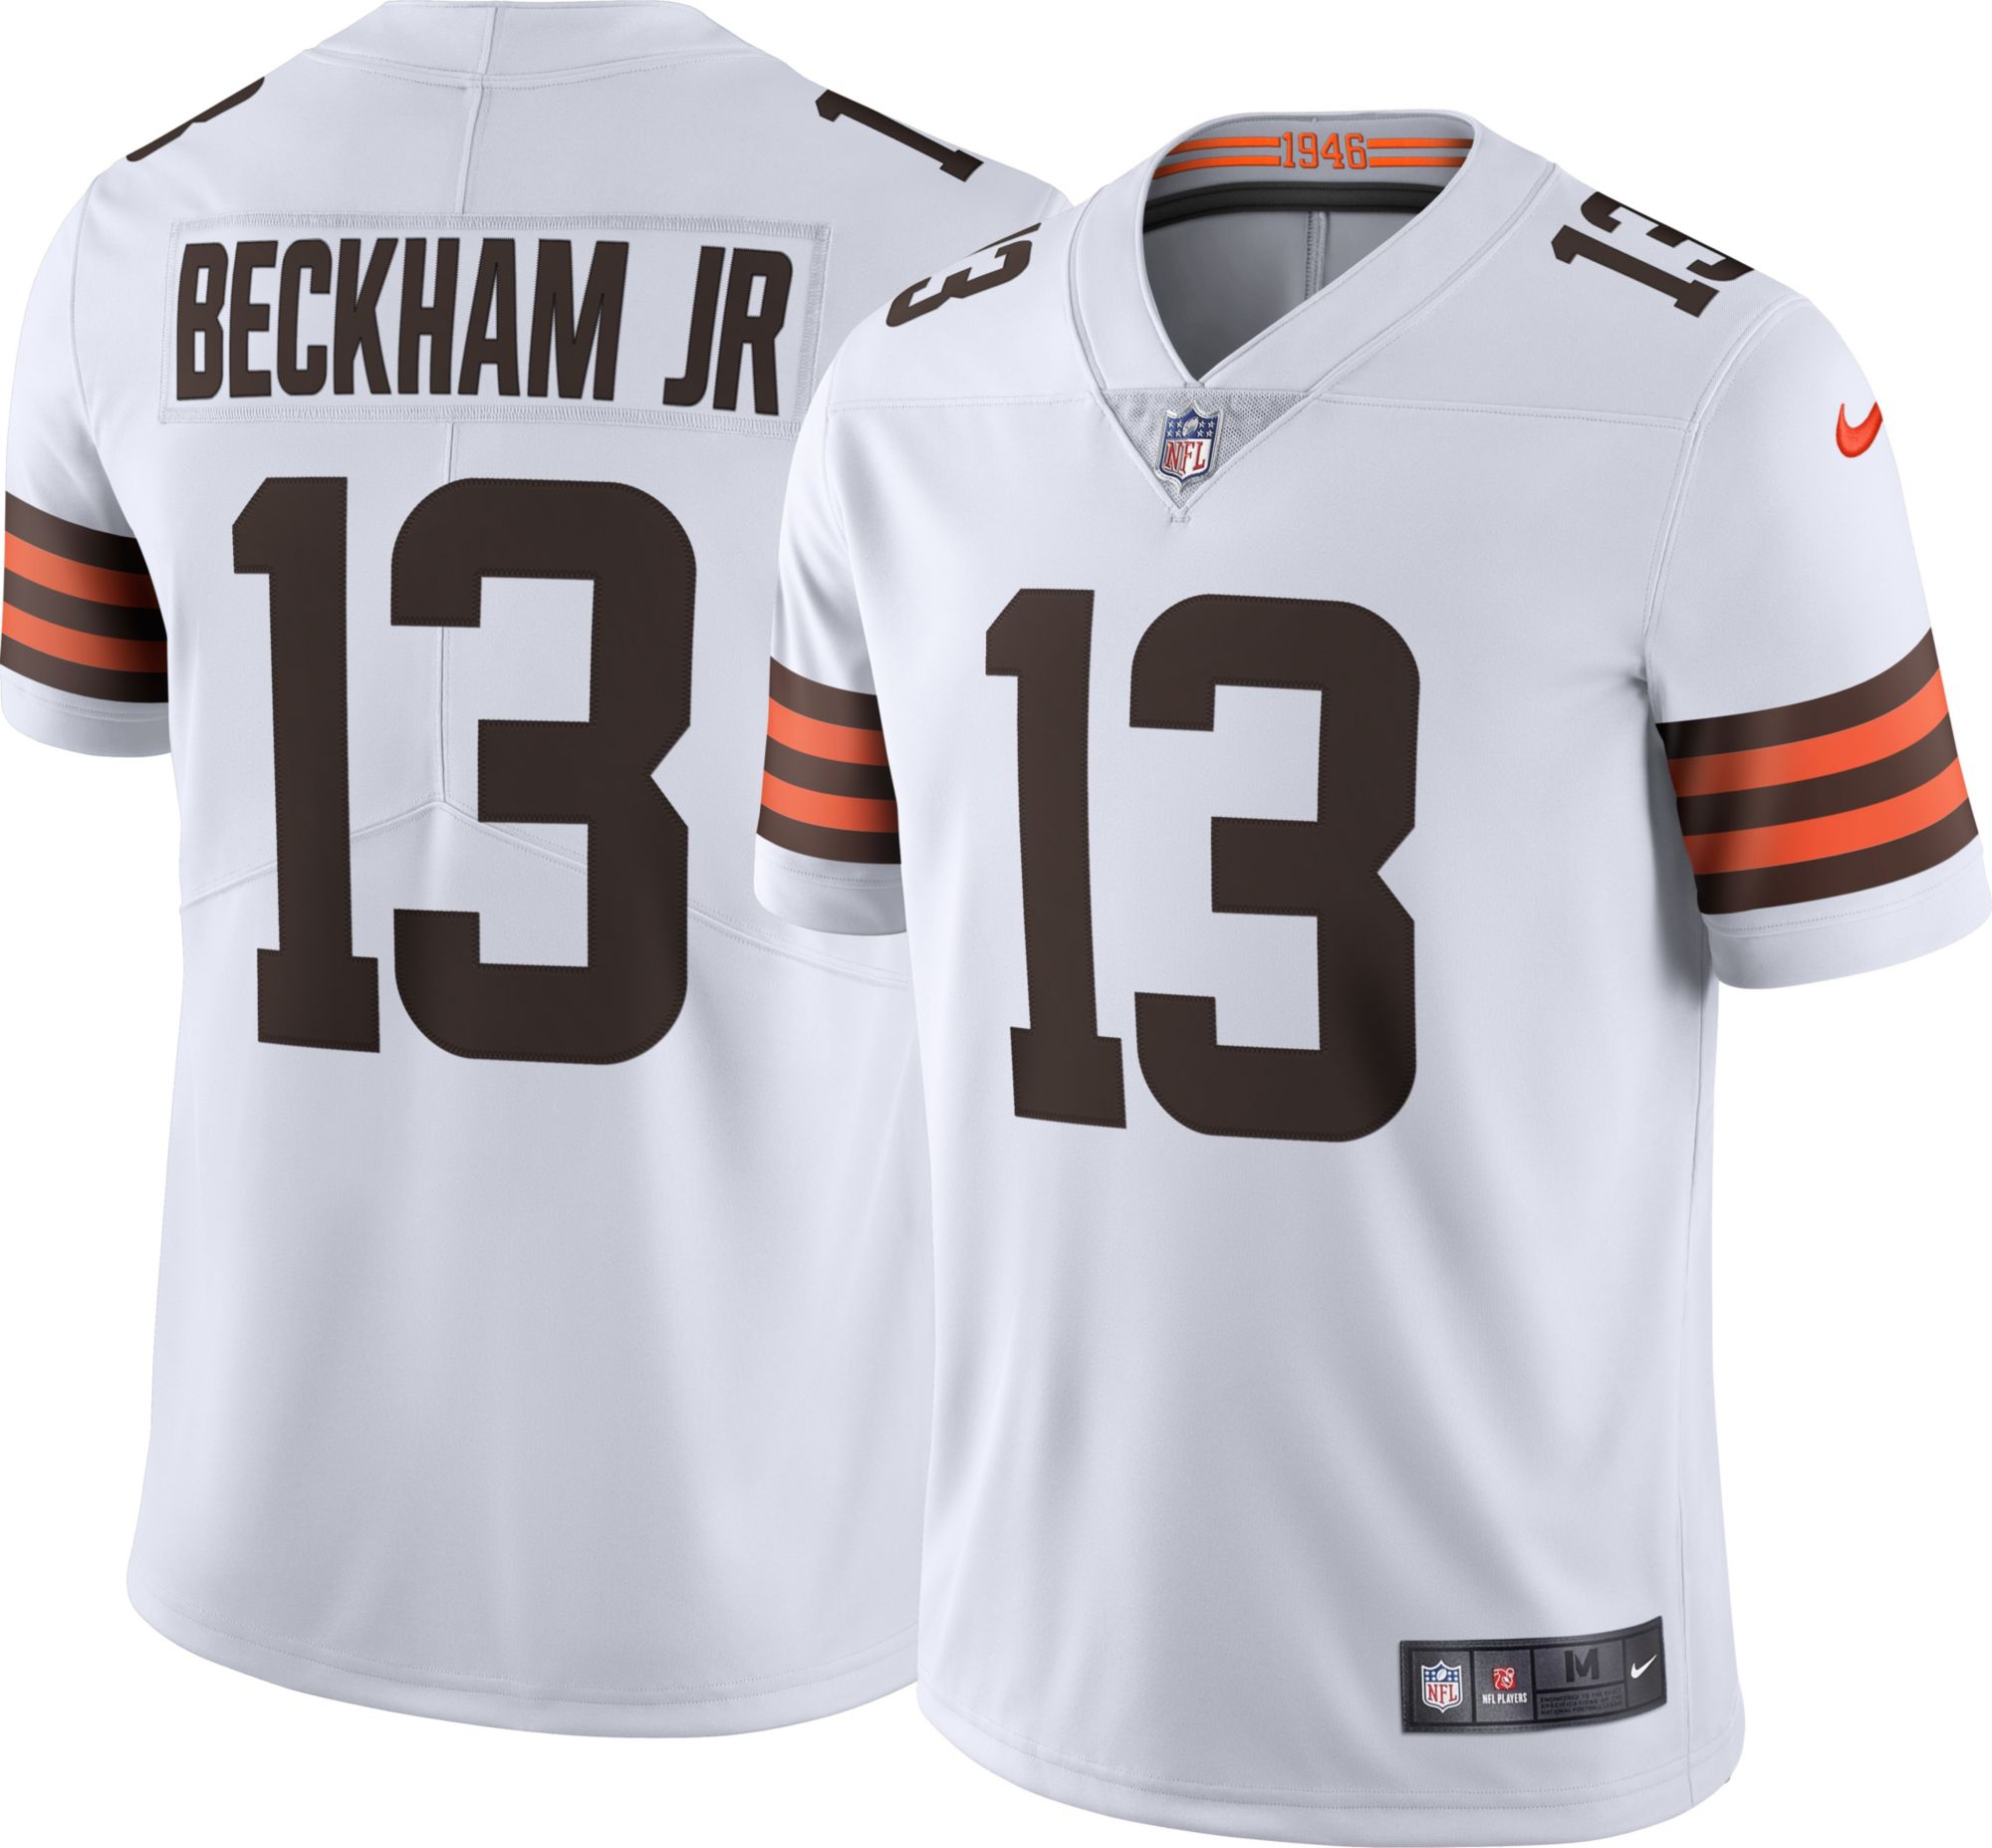 cleveland browns 13 jersey